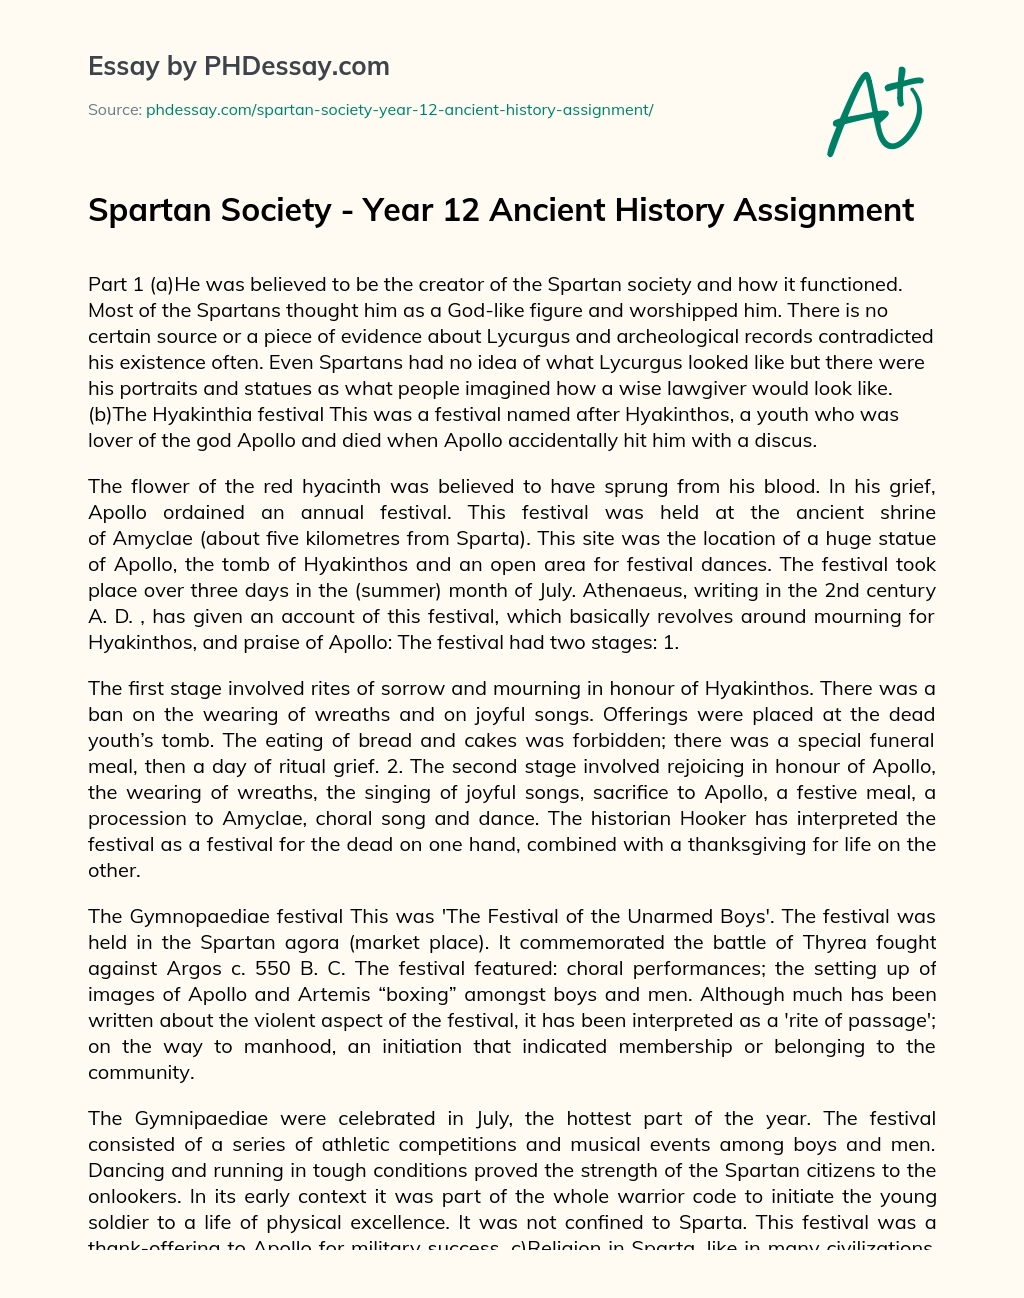 Spartan Society – Year 12 Ancient History Assignment essay